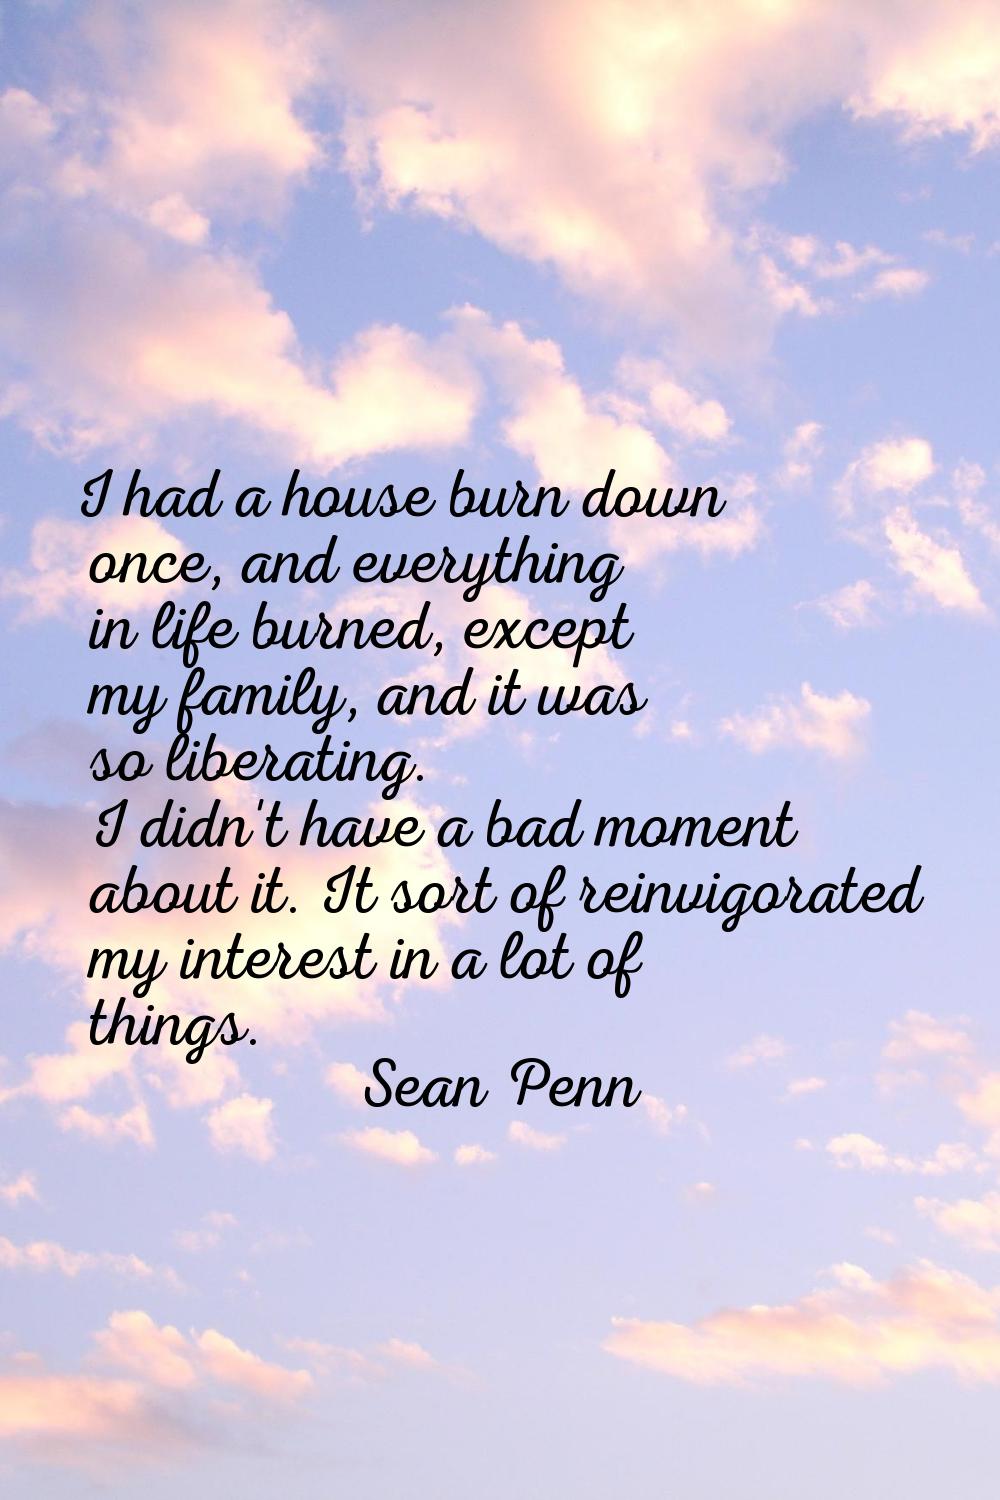 I had a house burn down once, and everything in life burned, except my family, and it was so libera